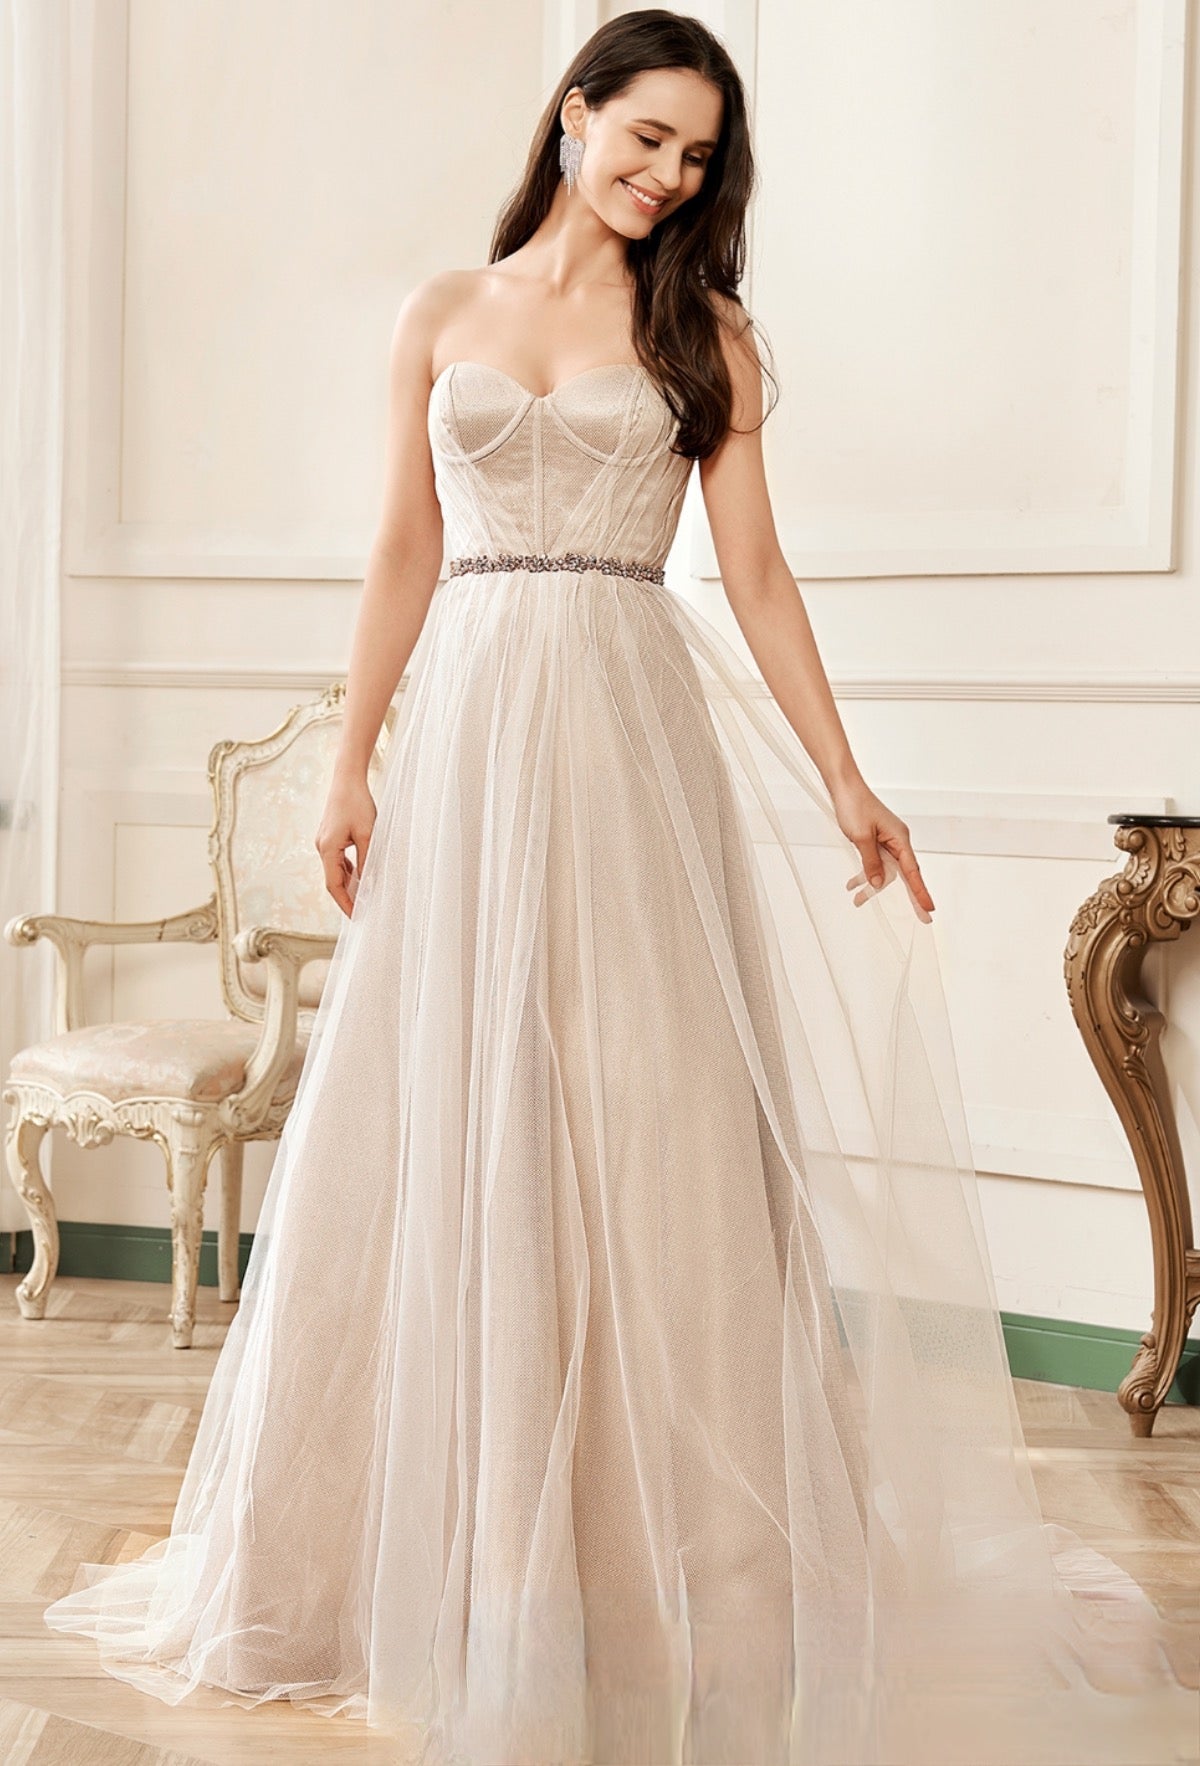 Shimmer Pink Sweetheart Corset Bridal Gown in Sparkle Tulle